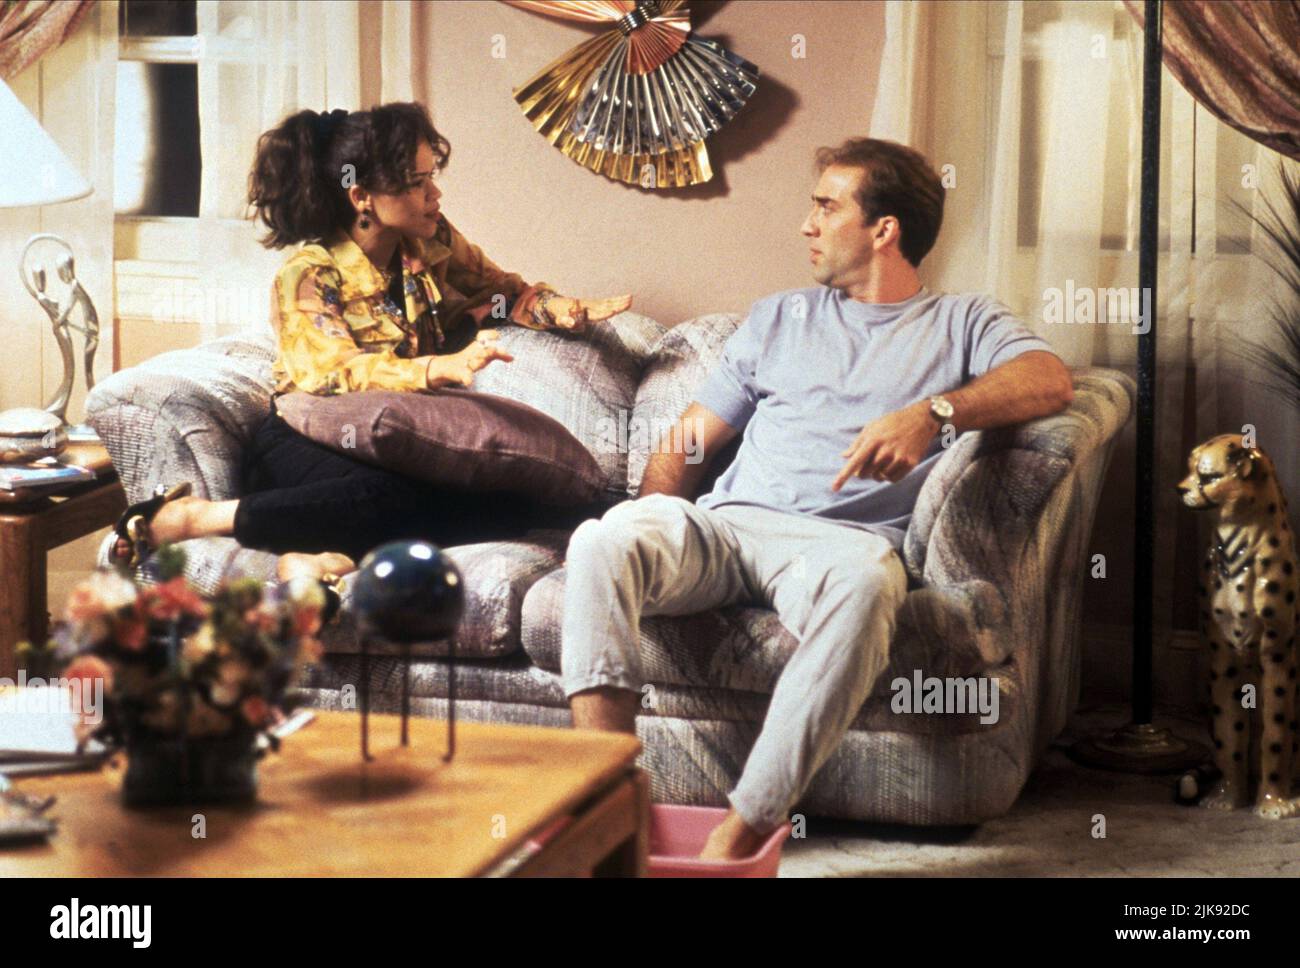 https://c8.alamy.com/comp/2JK92DC/rosie-perez-nicolas-cage-film-it-could-happen-to-you-1990-characters-muriel-lang-charlie-lang-director-andrew-bergman-29-july-1994-warning-this-photograph-is-for-editorial-use-only-and-is-the-copyright-of-tristar-andor-the-photographer-assigned-by-the-film-or-production-company-and-can-only-be-reproduced-by-publications-in-conjunction-with-the-promotion-of-the-above-film-a-mandatory-credit-to-tristar-is-required-the-photographer-should-also-be-credited-when-known-no-commercial-use-can-be-granted-without-written-authority-from-the-film-company-2JK92DC.jpg